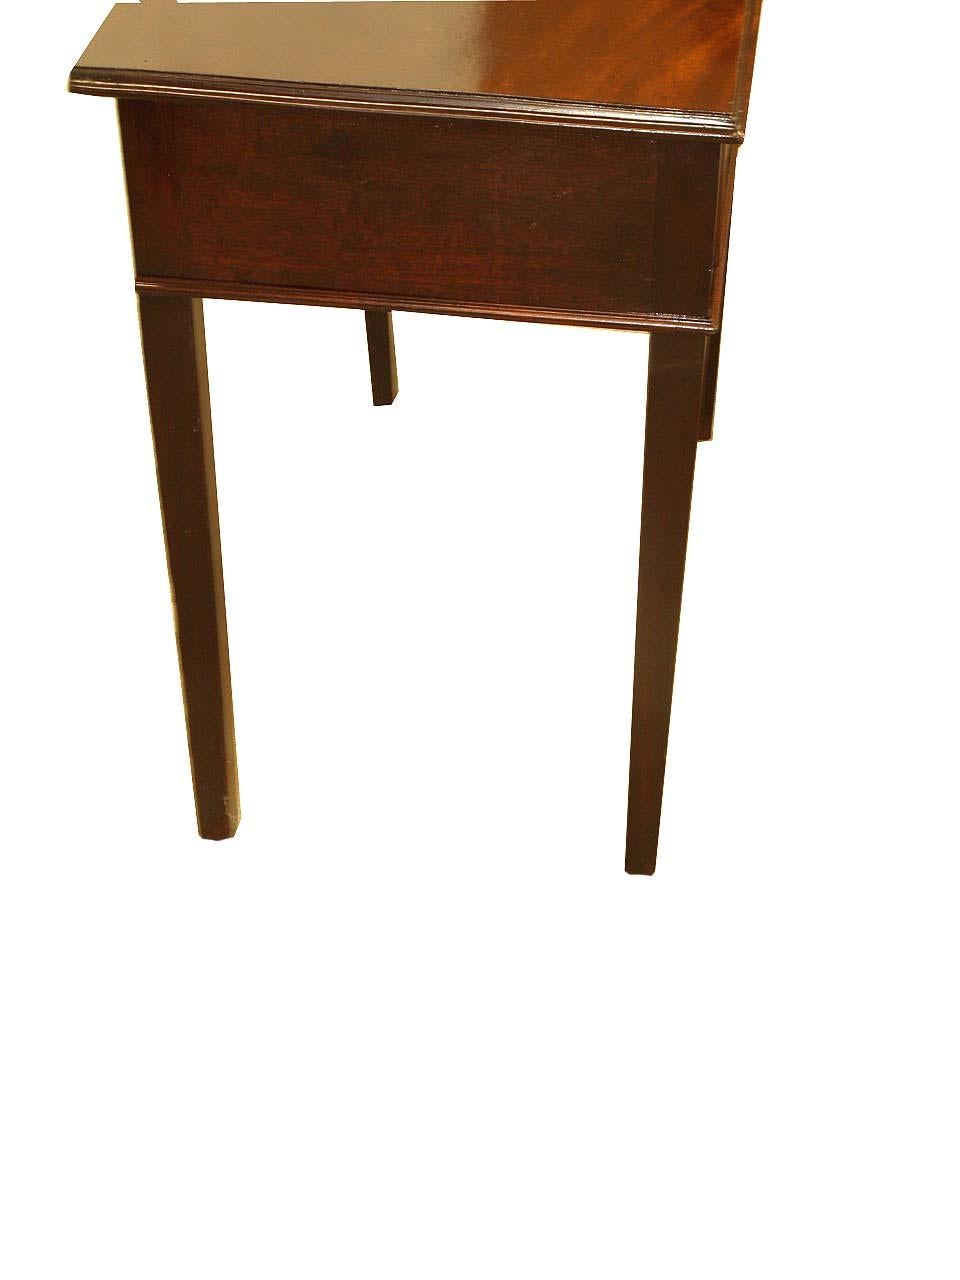 Hepplewhite mahogany side table, the top having beautiful color and patina, the single drawer with oval brass pull and oak secondary wood, nicely tapered leg with applied molding around the perimeter.